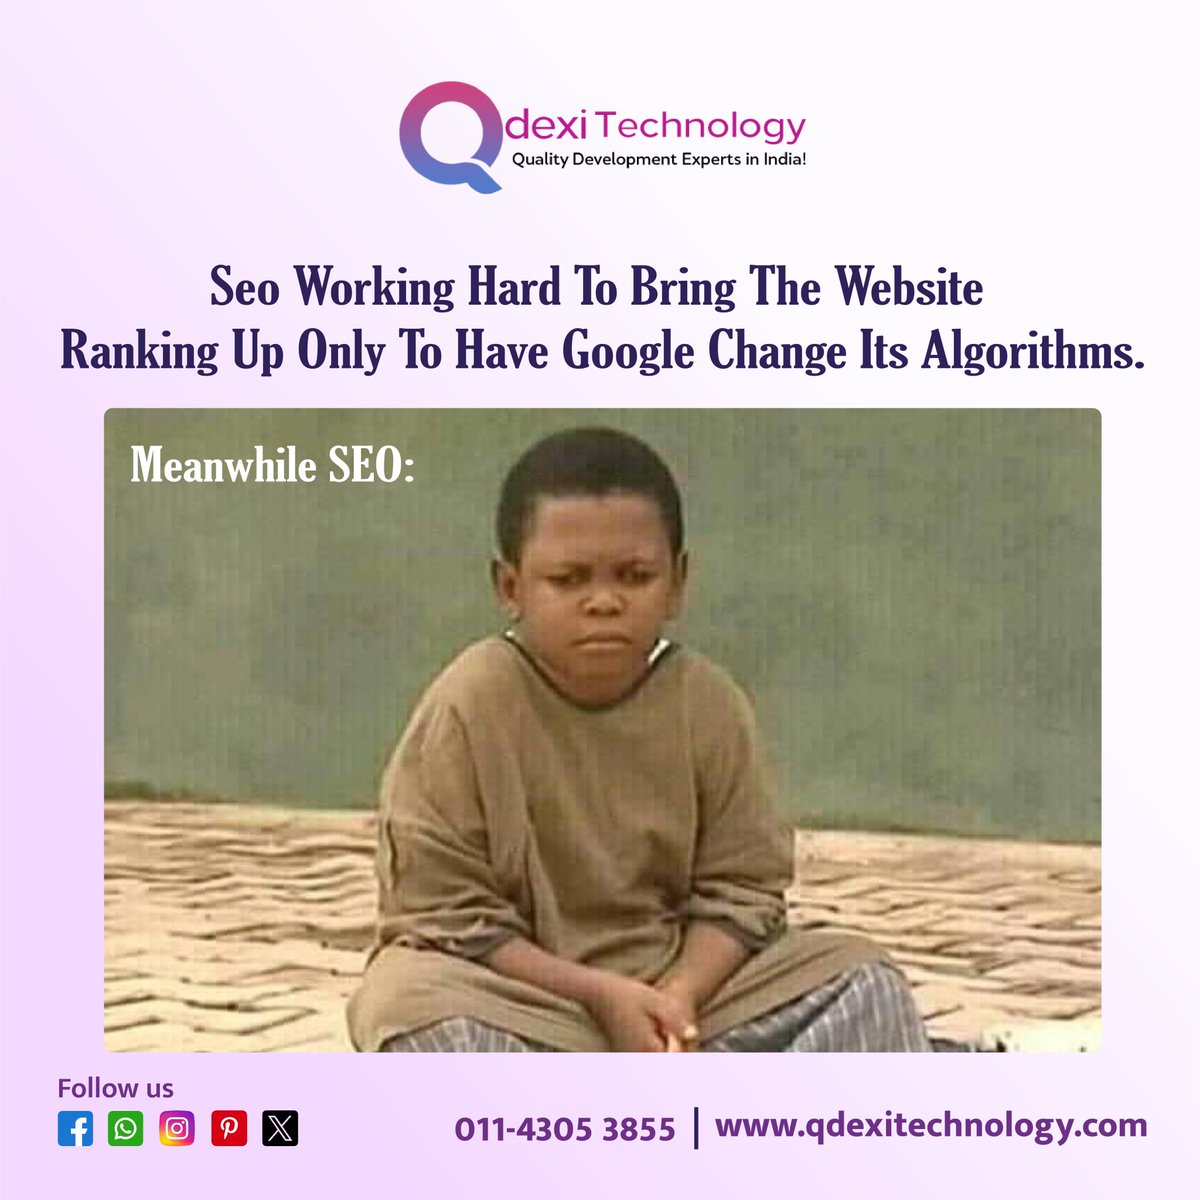 Indian quality development experts navigate challenges with SEO due to Google's evolving algorithms, influencing website rankings. Qdexi Technology: Quality Solutions, Innovative Approach.

#QdexiTechnology #QualityDevelopment #SEOIndia #GoogleAlgorithms